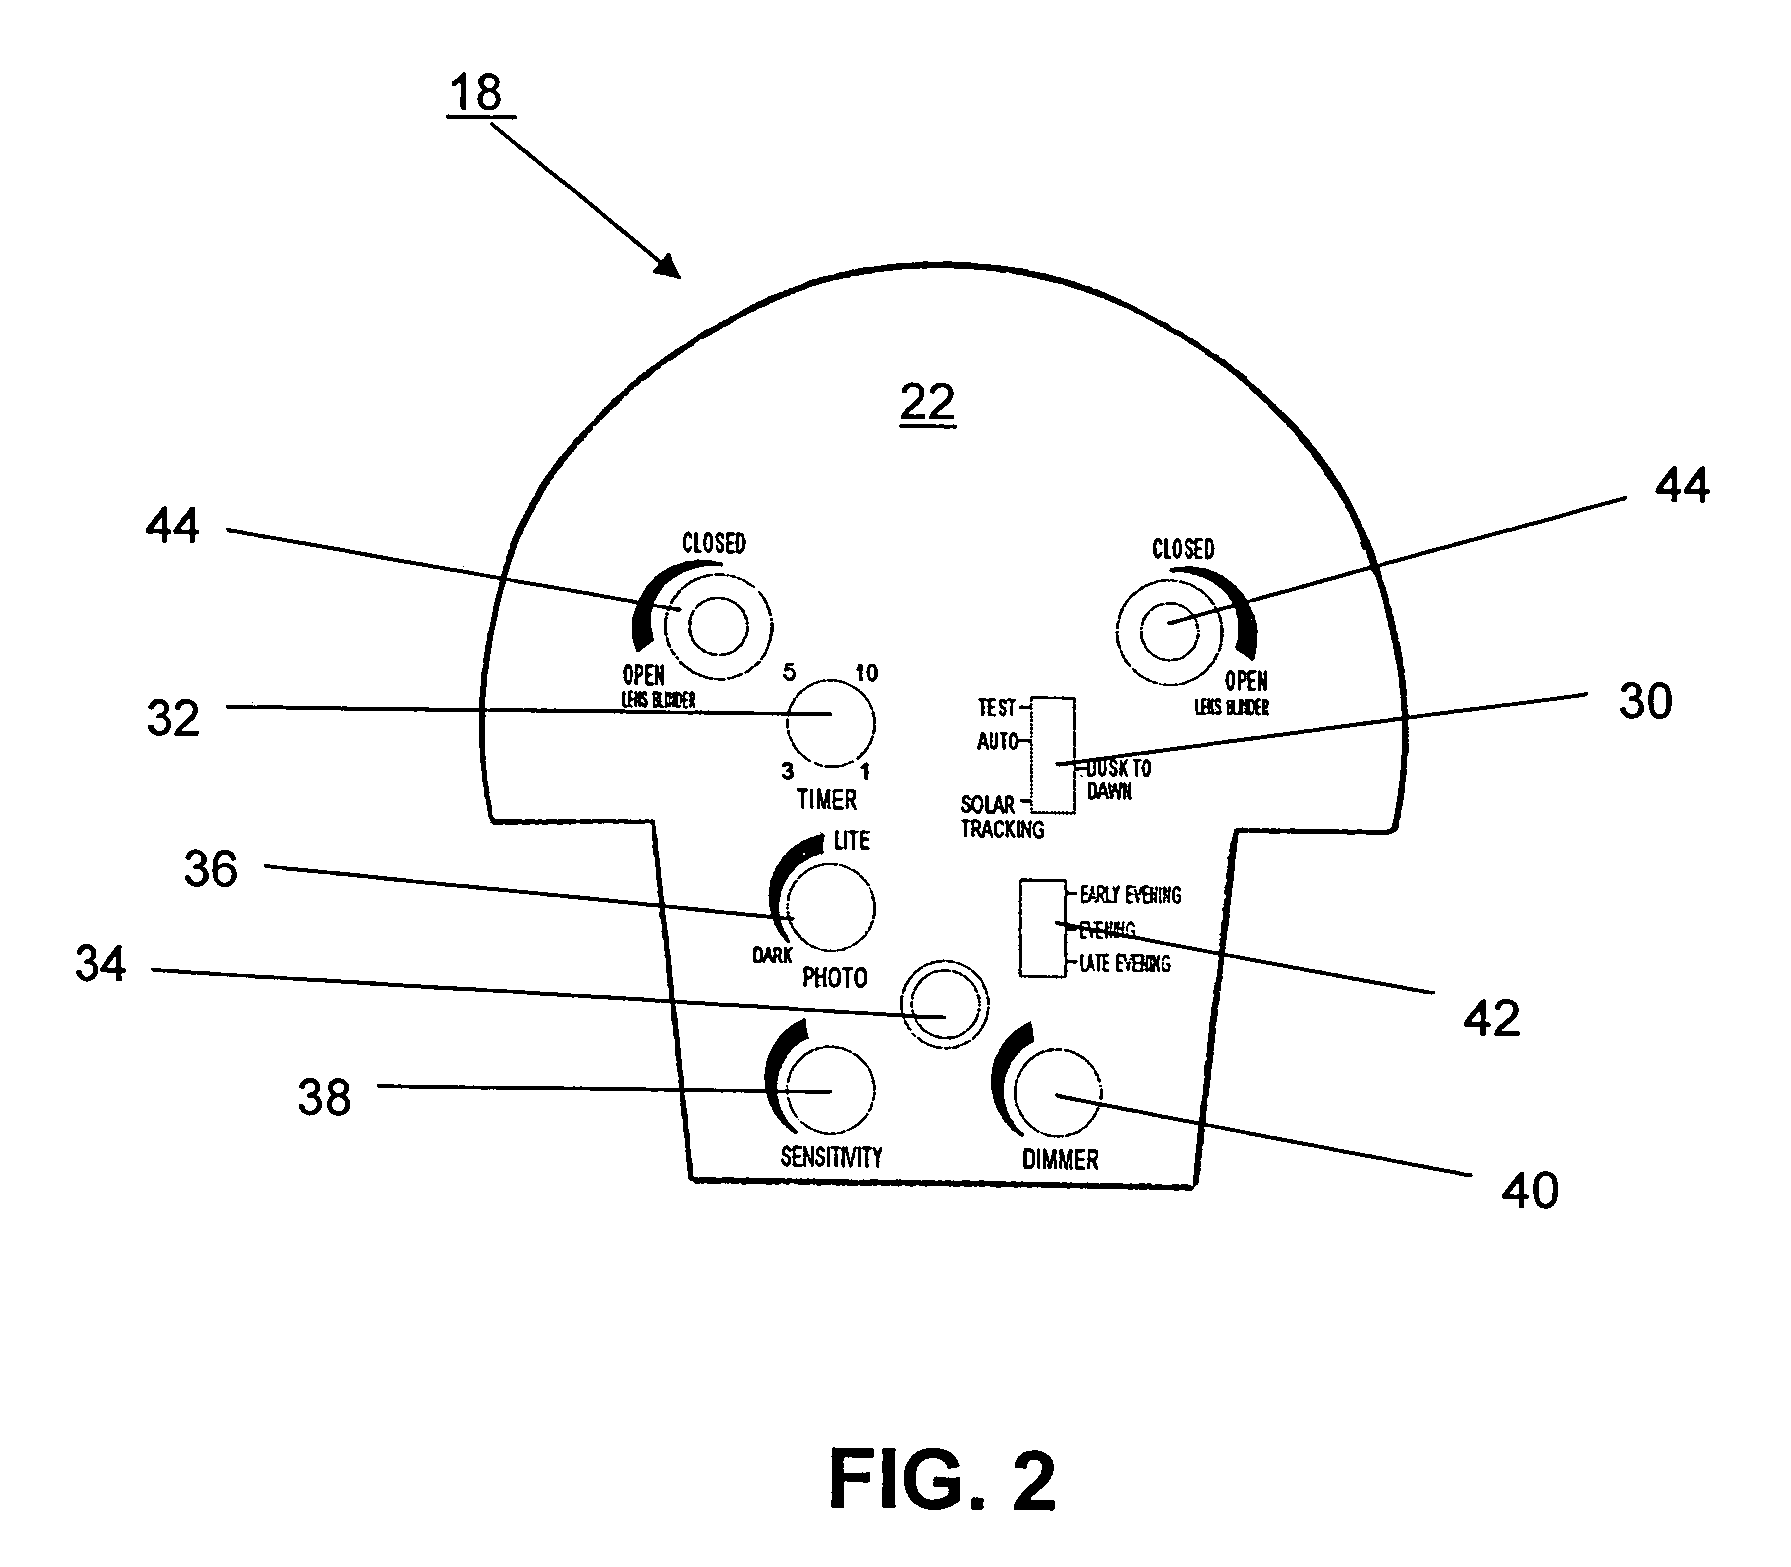 Nighttime-controlled lighting system